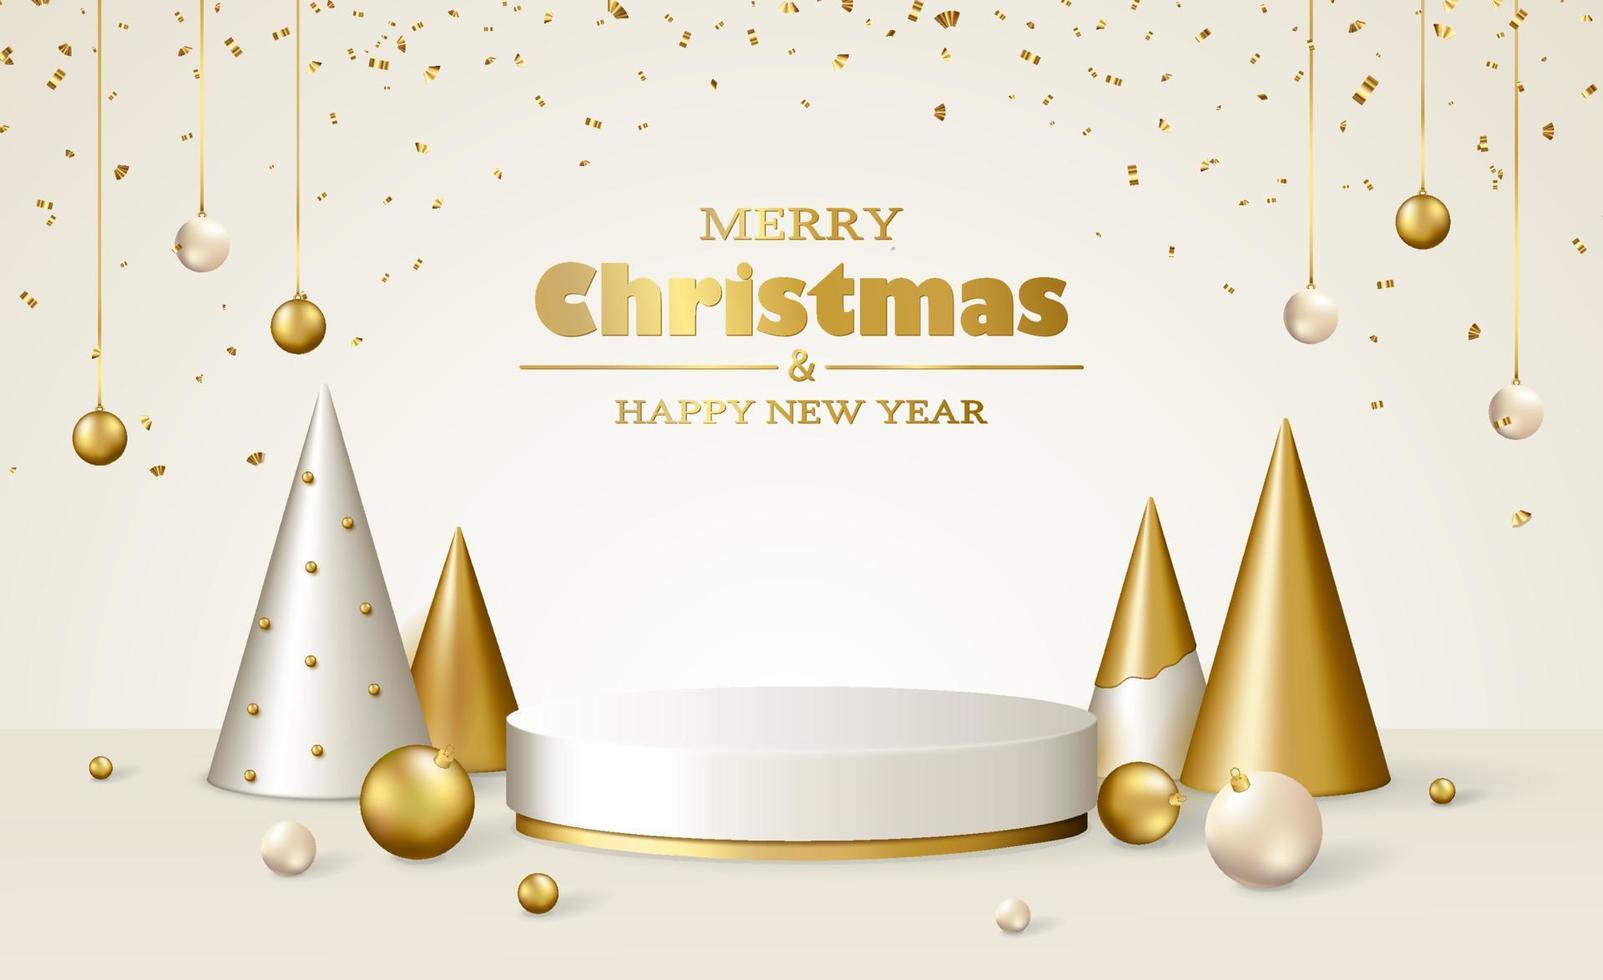 Christmas 3d scene with red and gold podium platform, Christmas fir trees and balls, confetti. vector